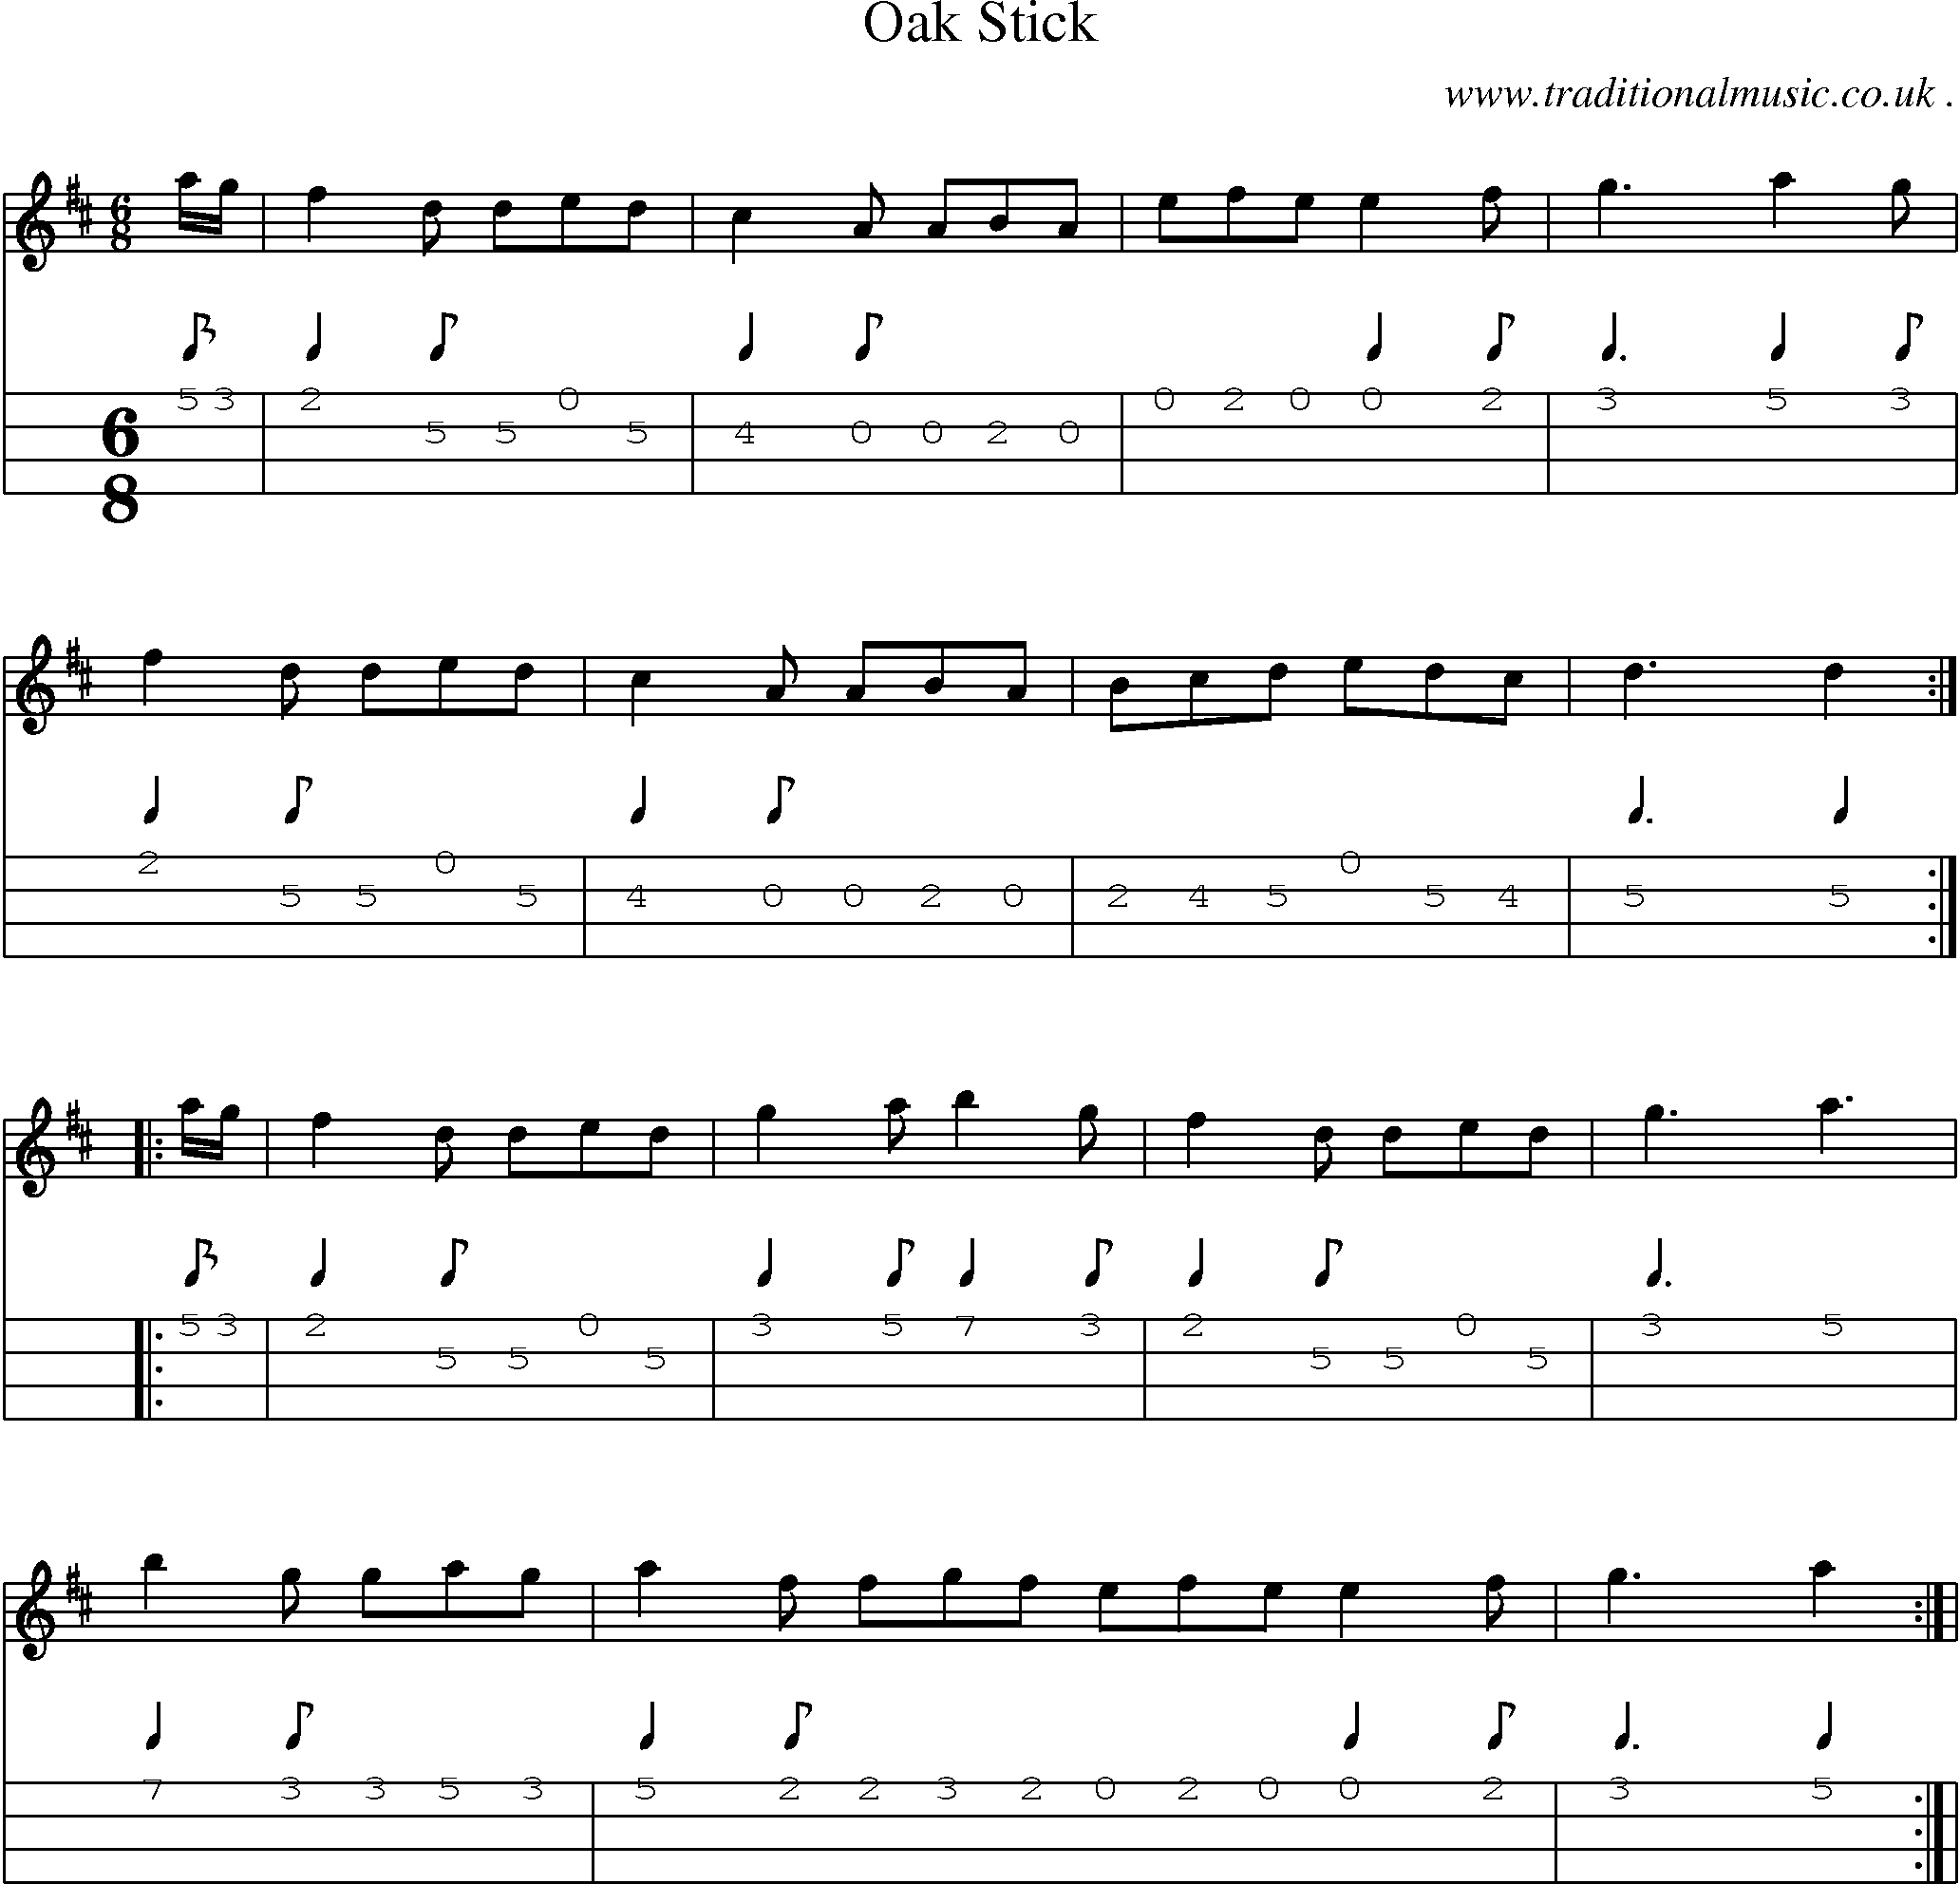 Sheet-Music and Mandolin Tabs for Oak Stick